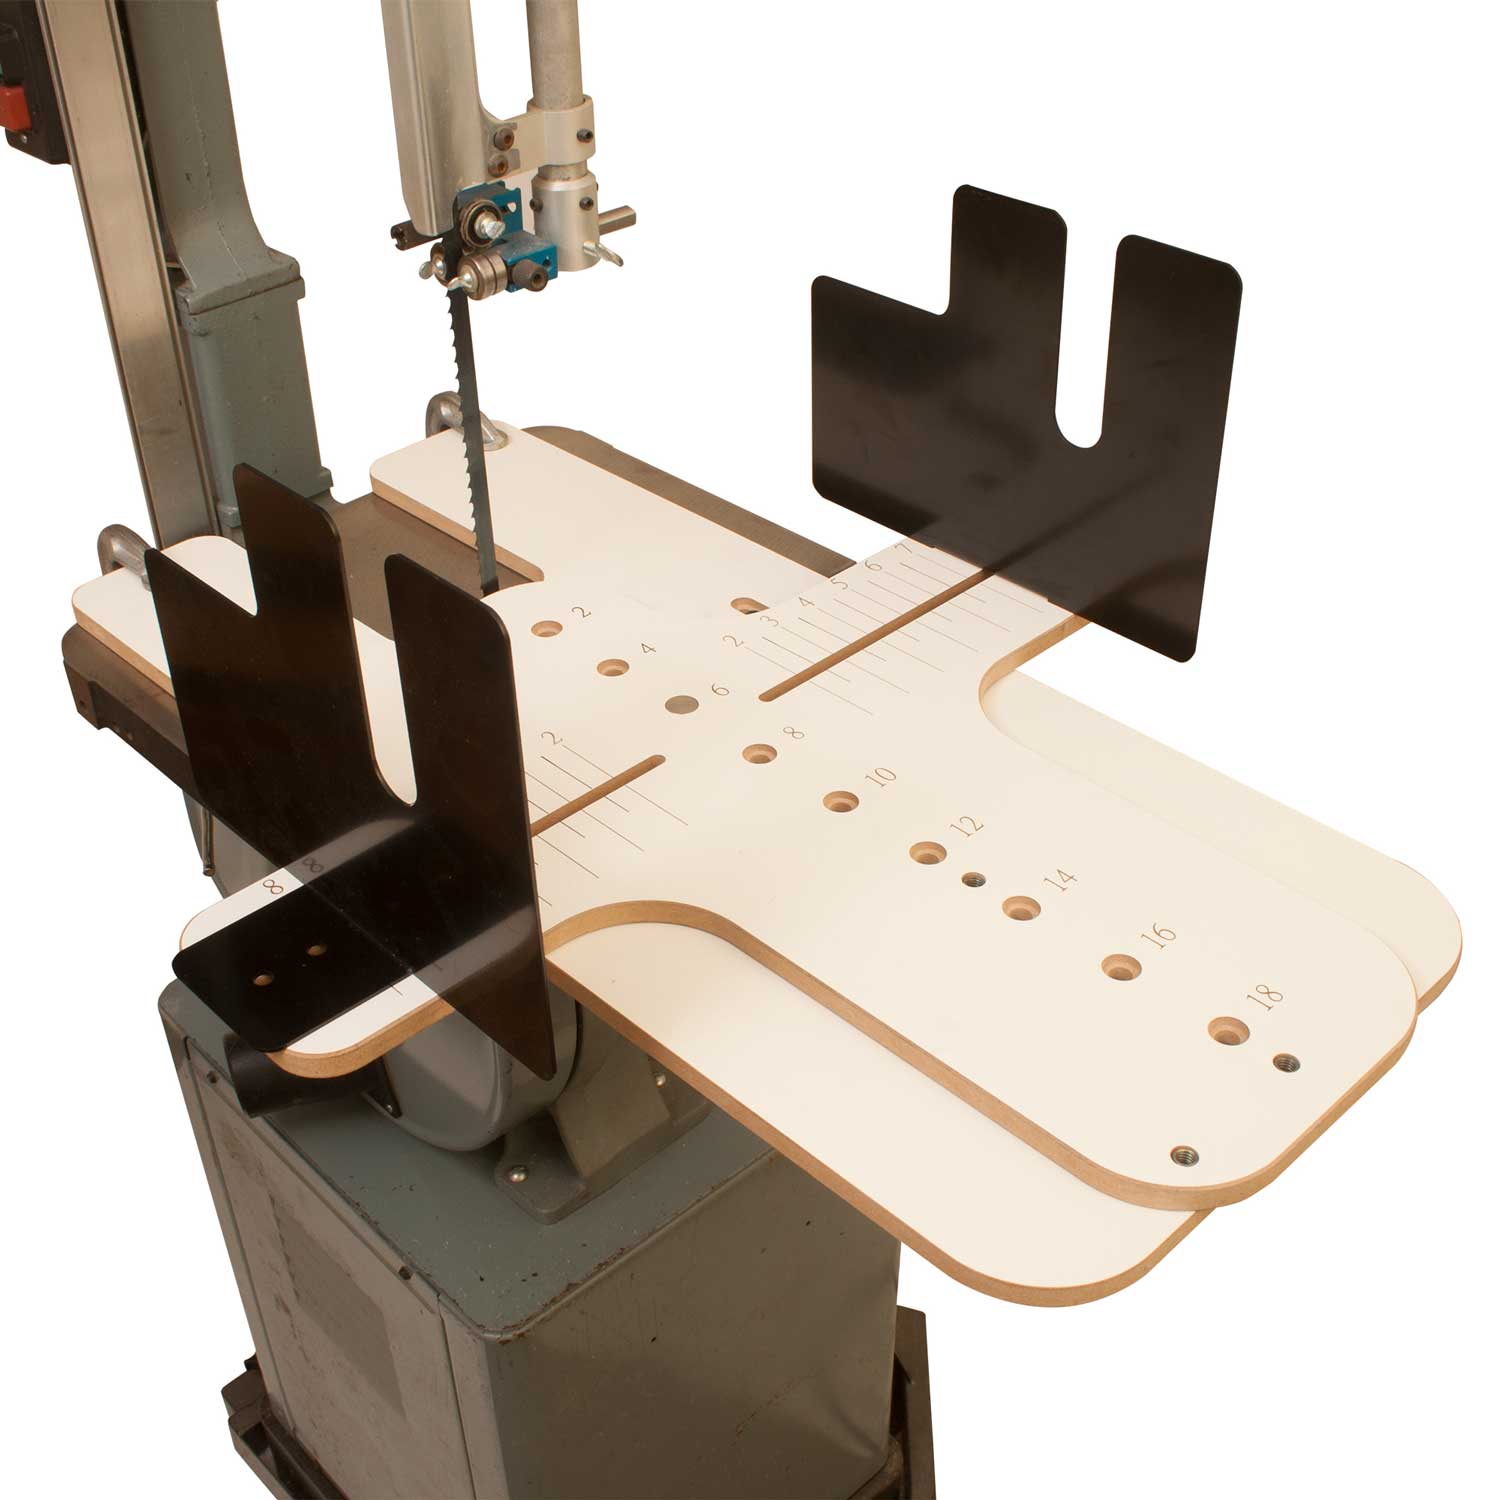 Convex Curve Cutter Jig for Concave Boxes